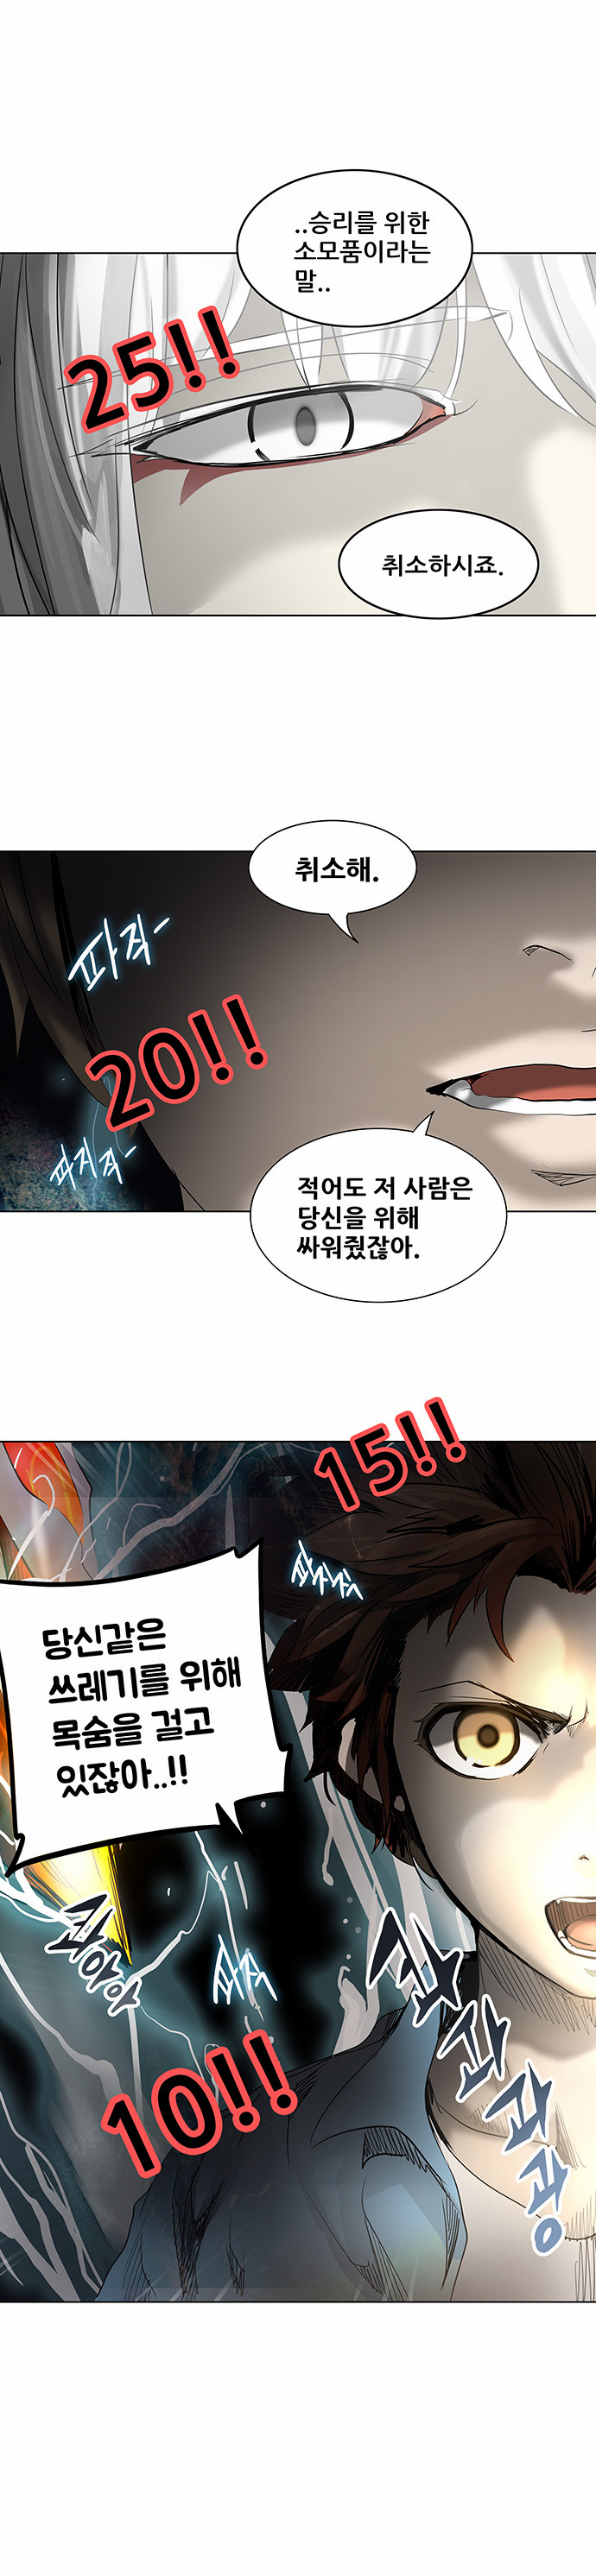 Tower of God - Chapter 272 - Page 1